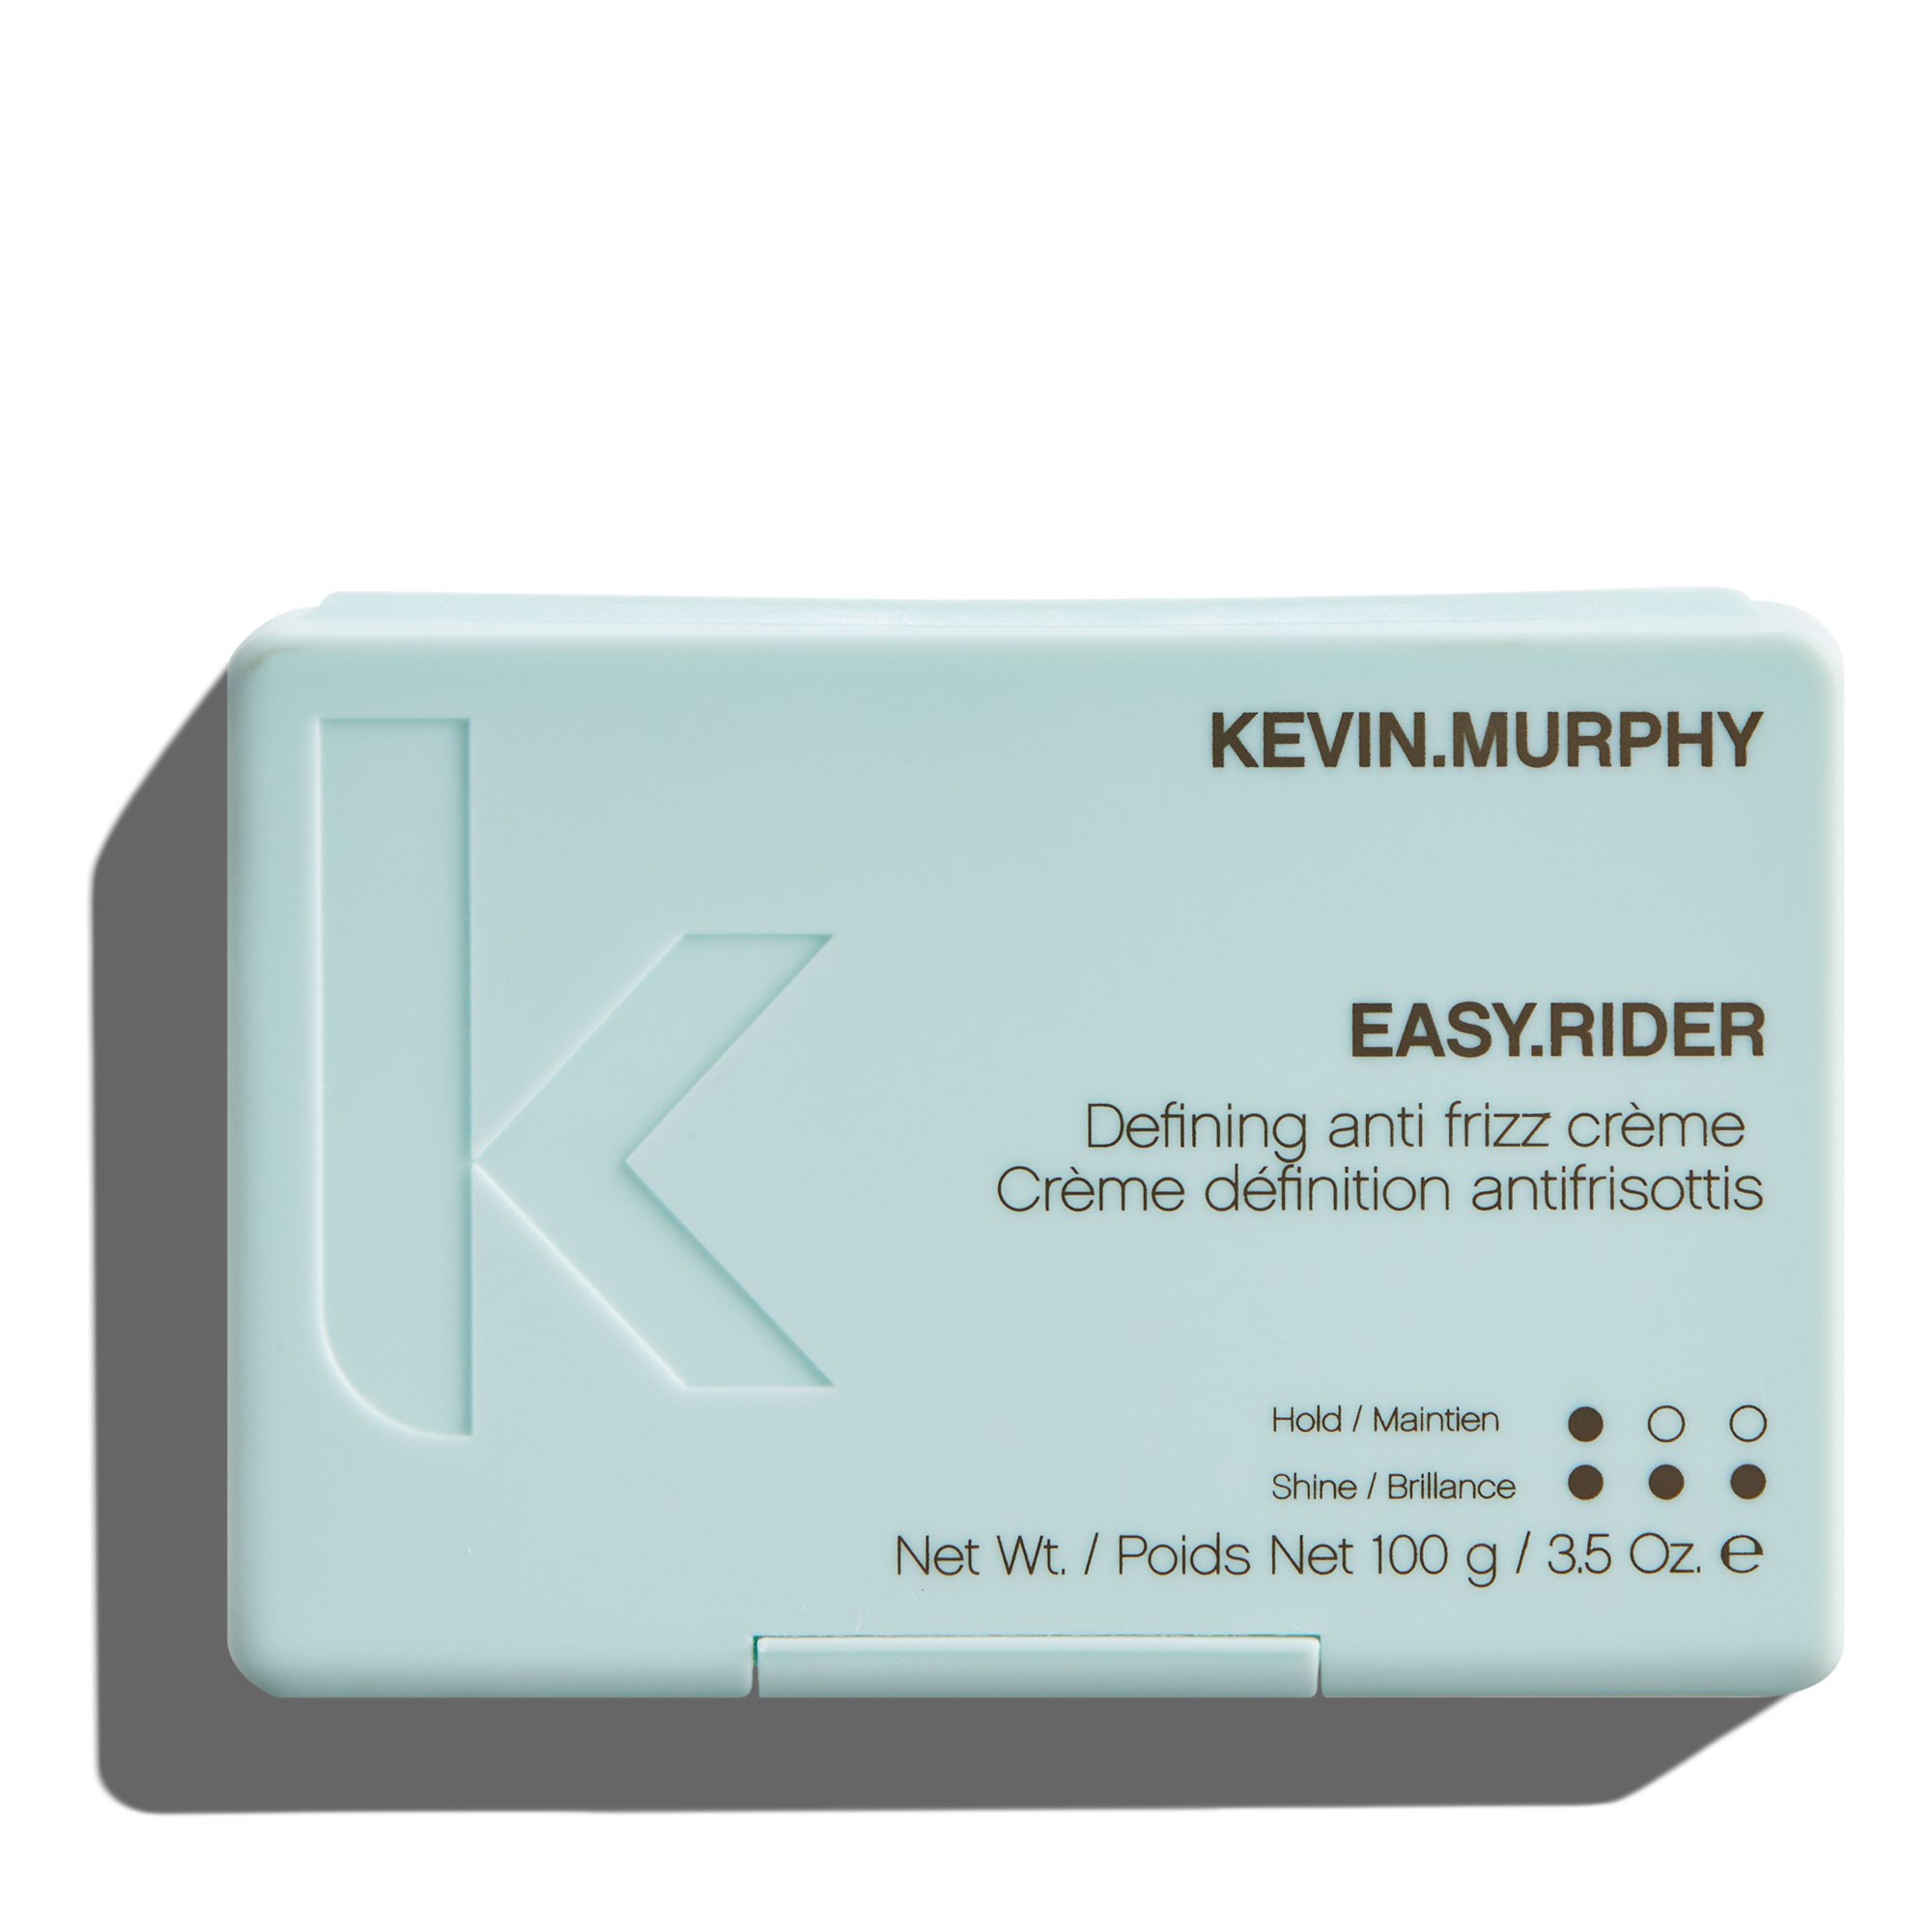 KEVIN.MURPHY For Men: EASY.RIDER